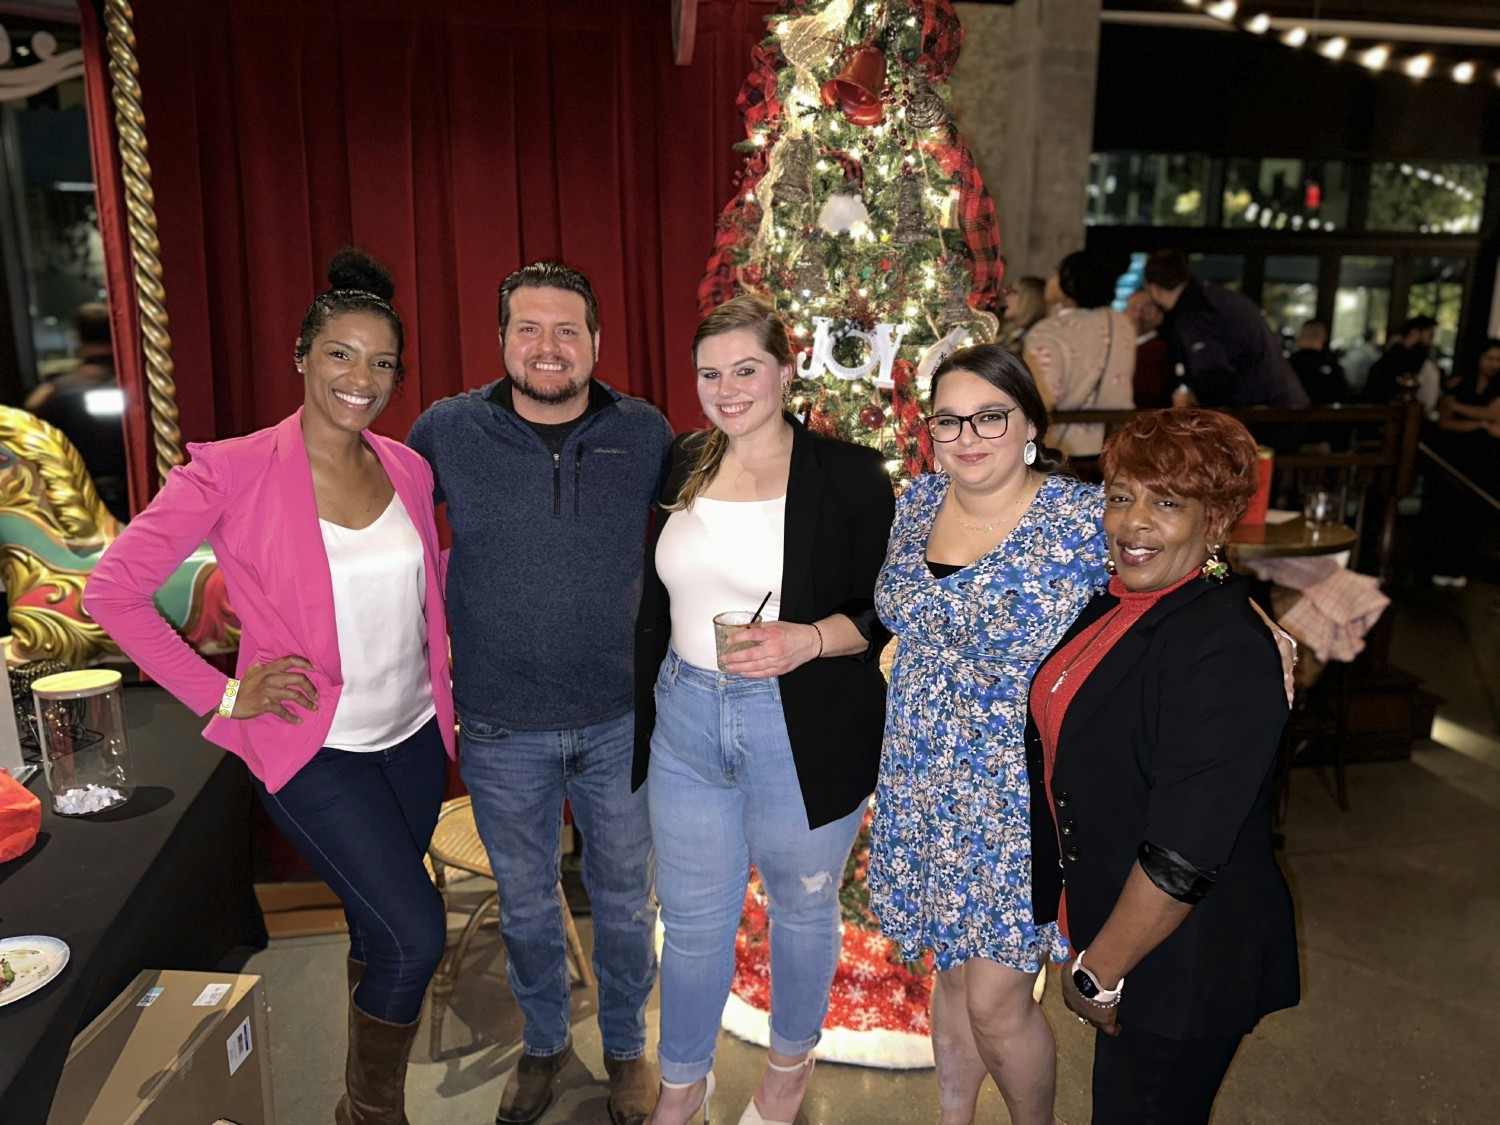 Fuller family celebrated the holidays at Flight Club Darts—dart-throwing, food, drinks, and prizes galore!